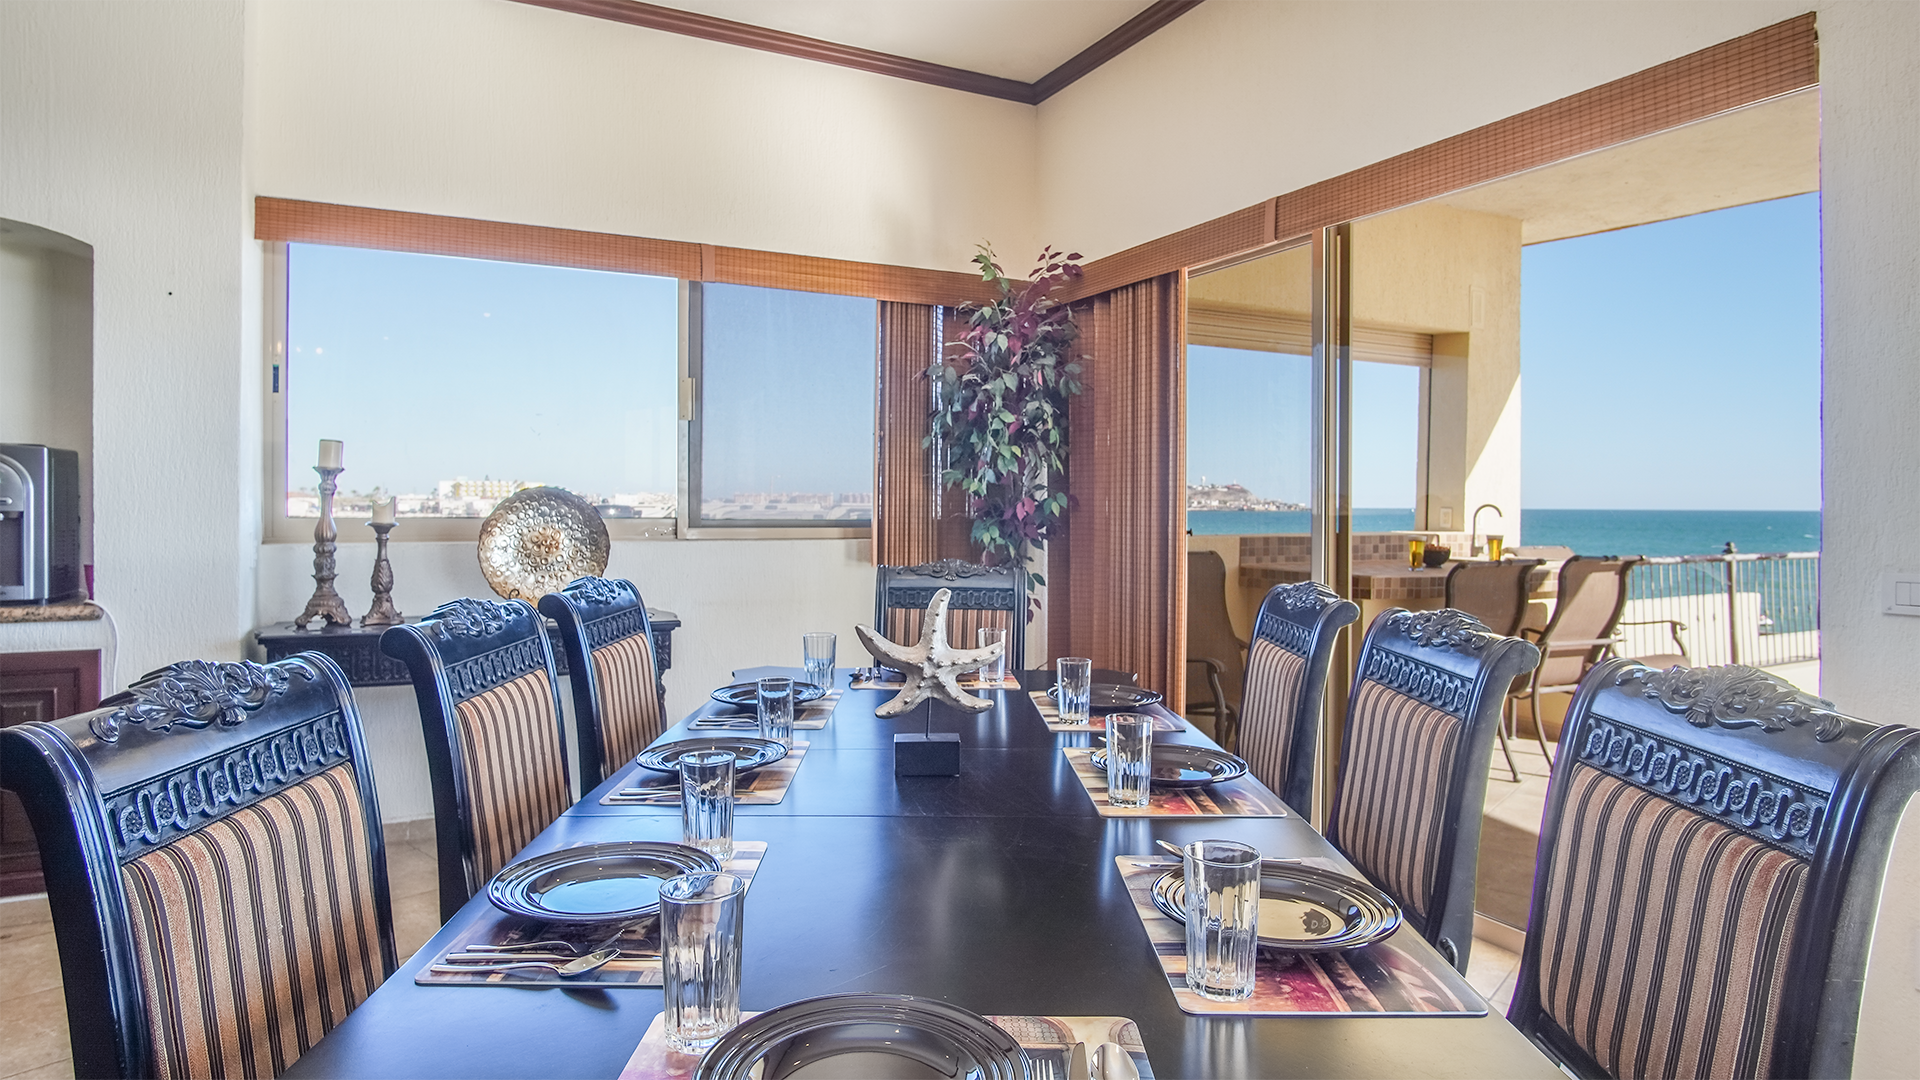 Eight guests can enjoy the spacious dining table.